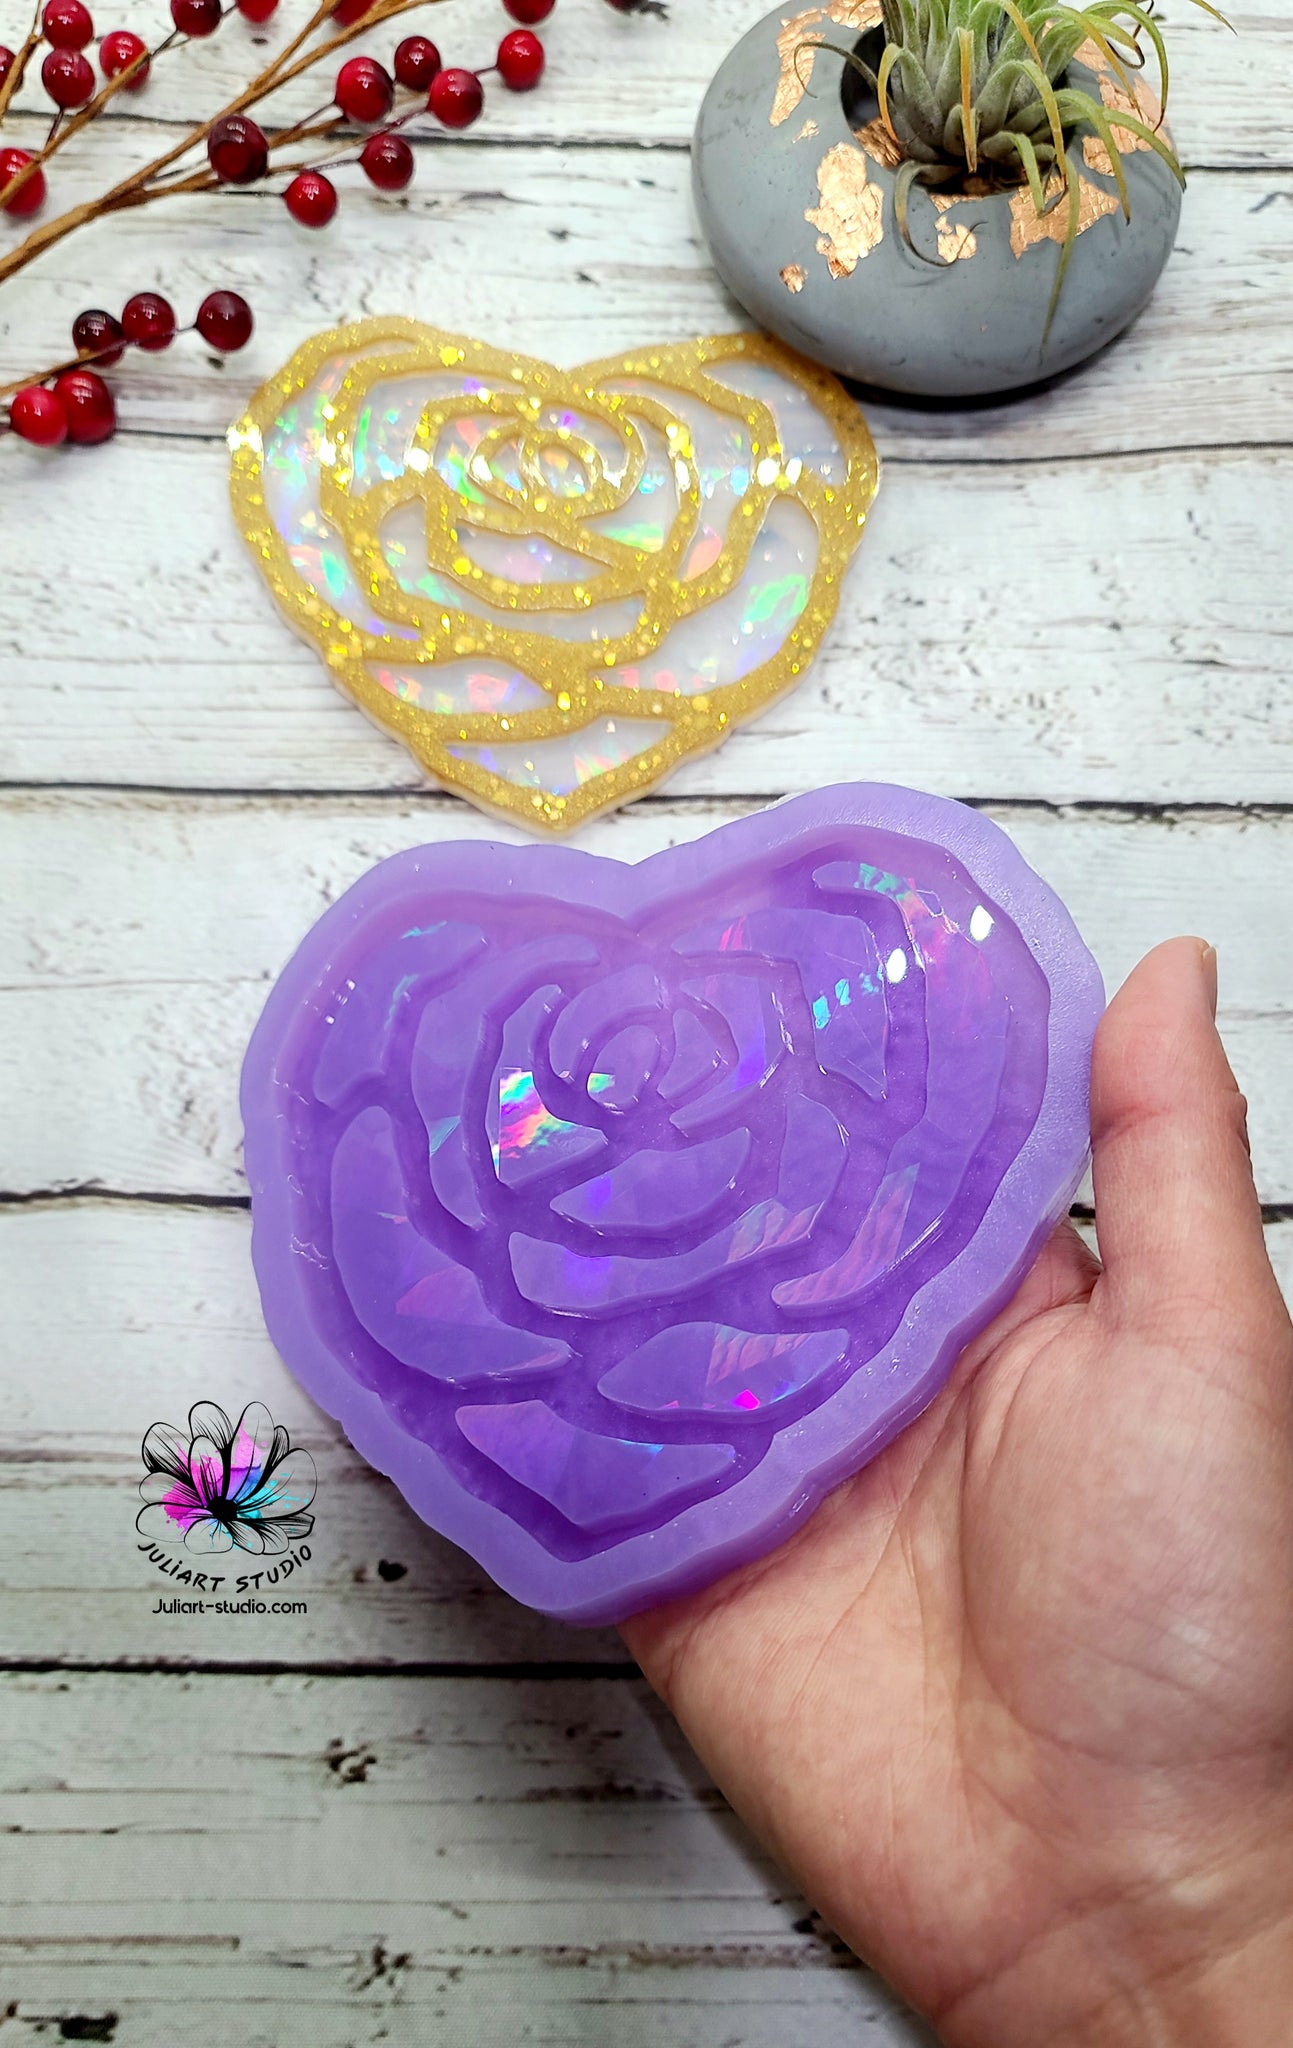 Holographic Coaster Mold Resin Casting Silicone Resin Coaster Mold